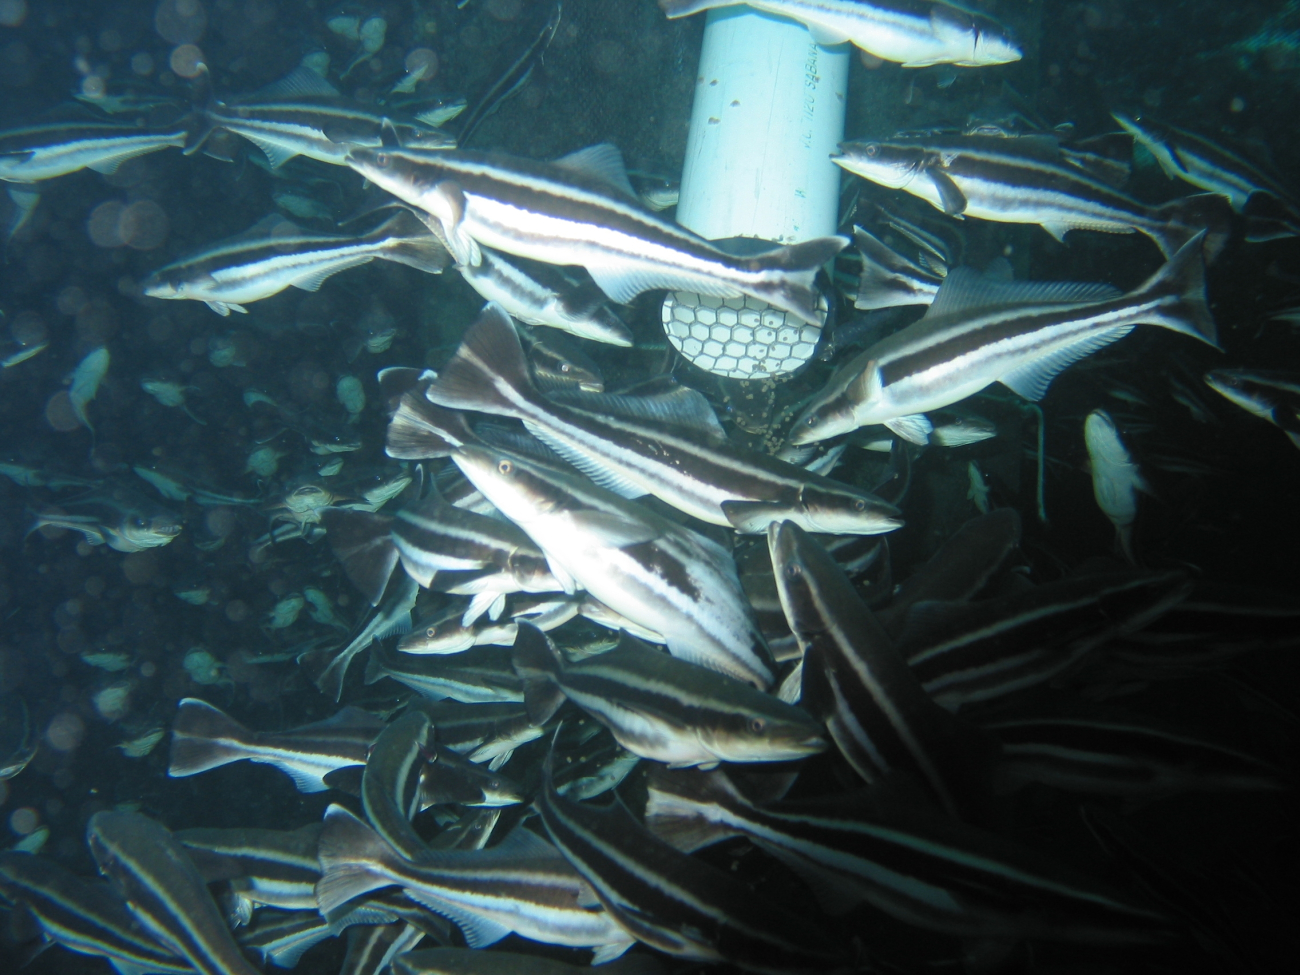 Juvenile cobia responding to a feeding pipe in an offshore cage off of theisland of Culebra, Puerto Rico